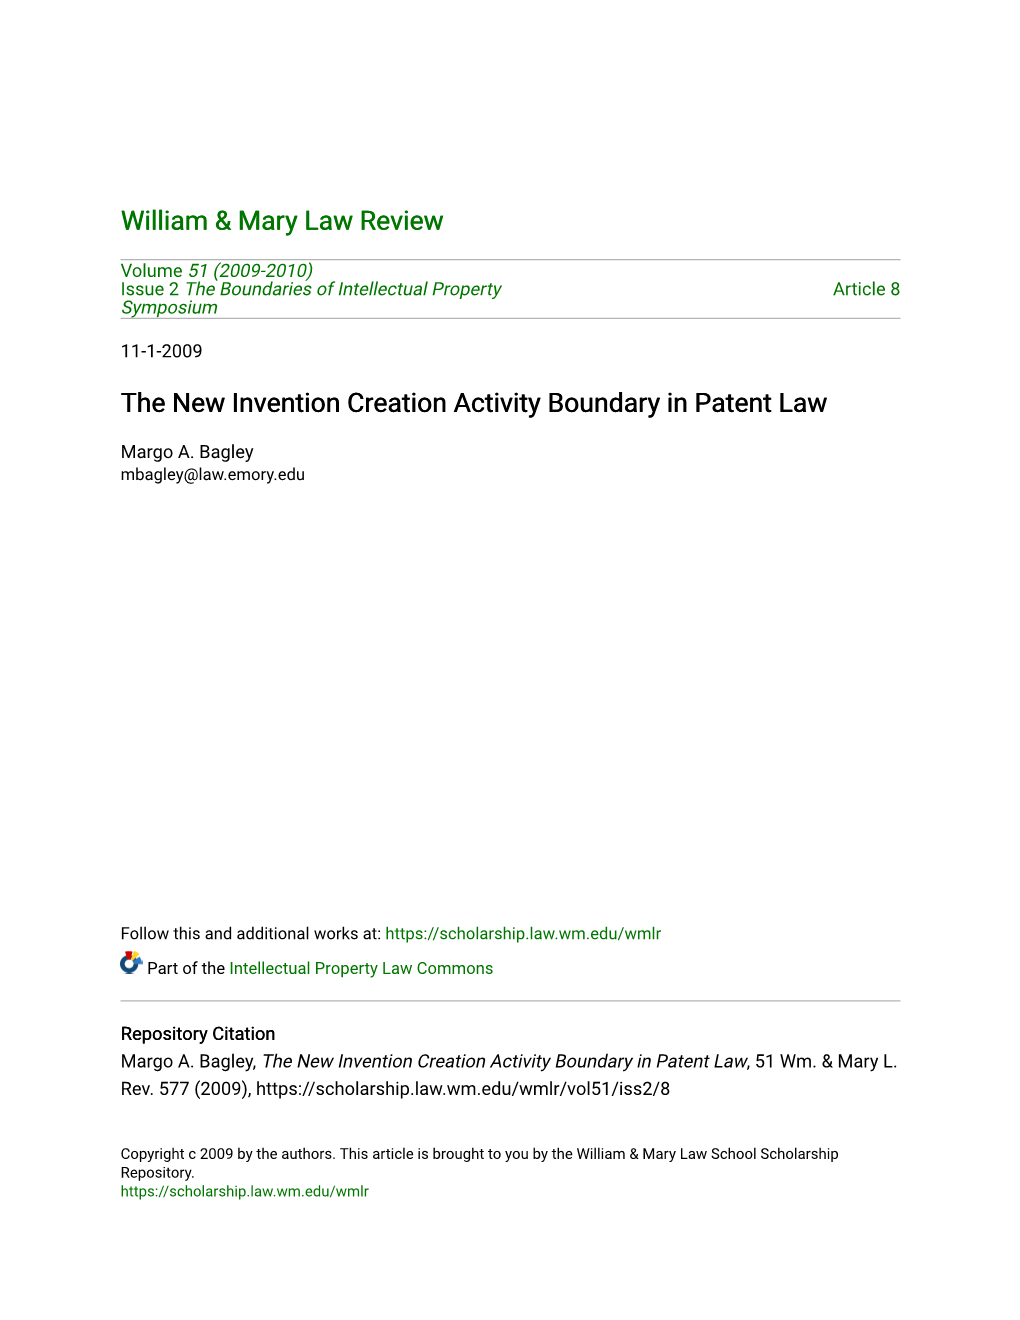 The New Invention Creation Activity Boundary in Patent Law